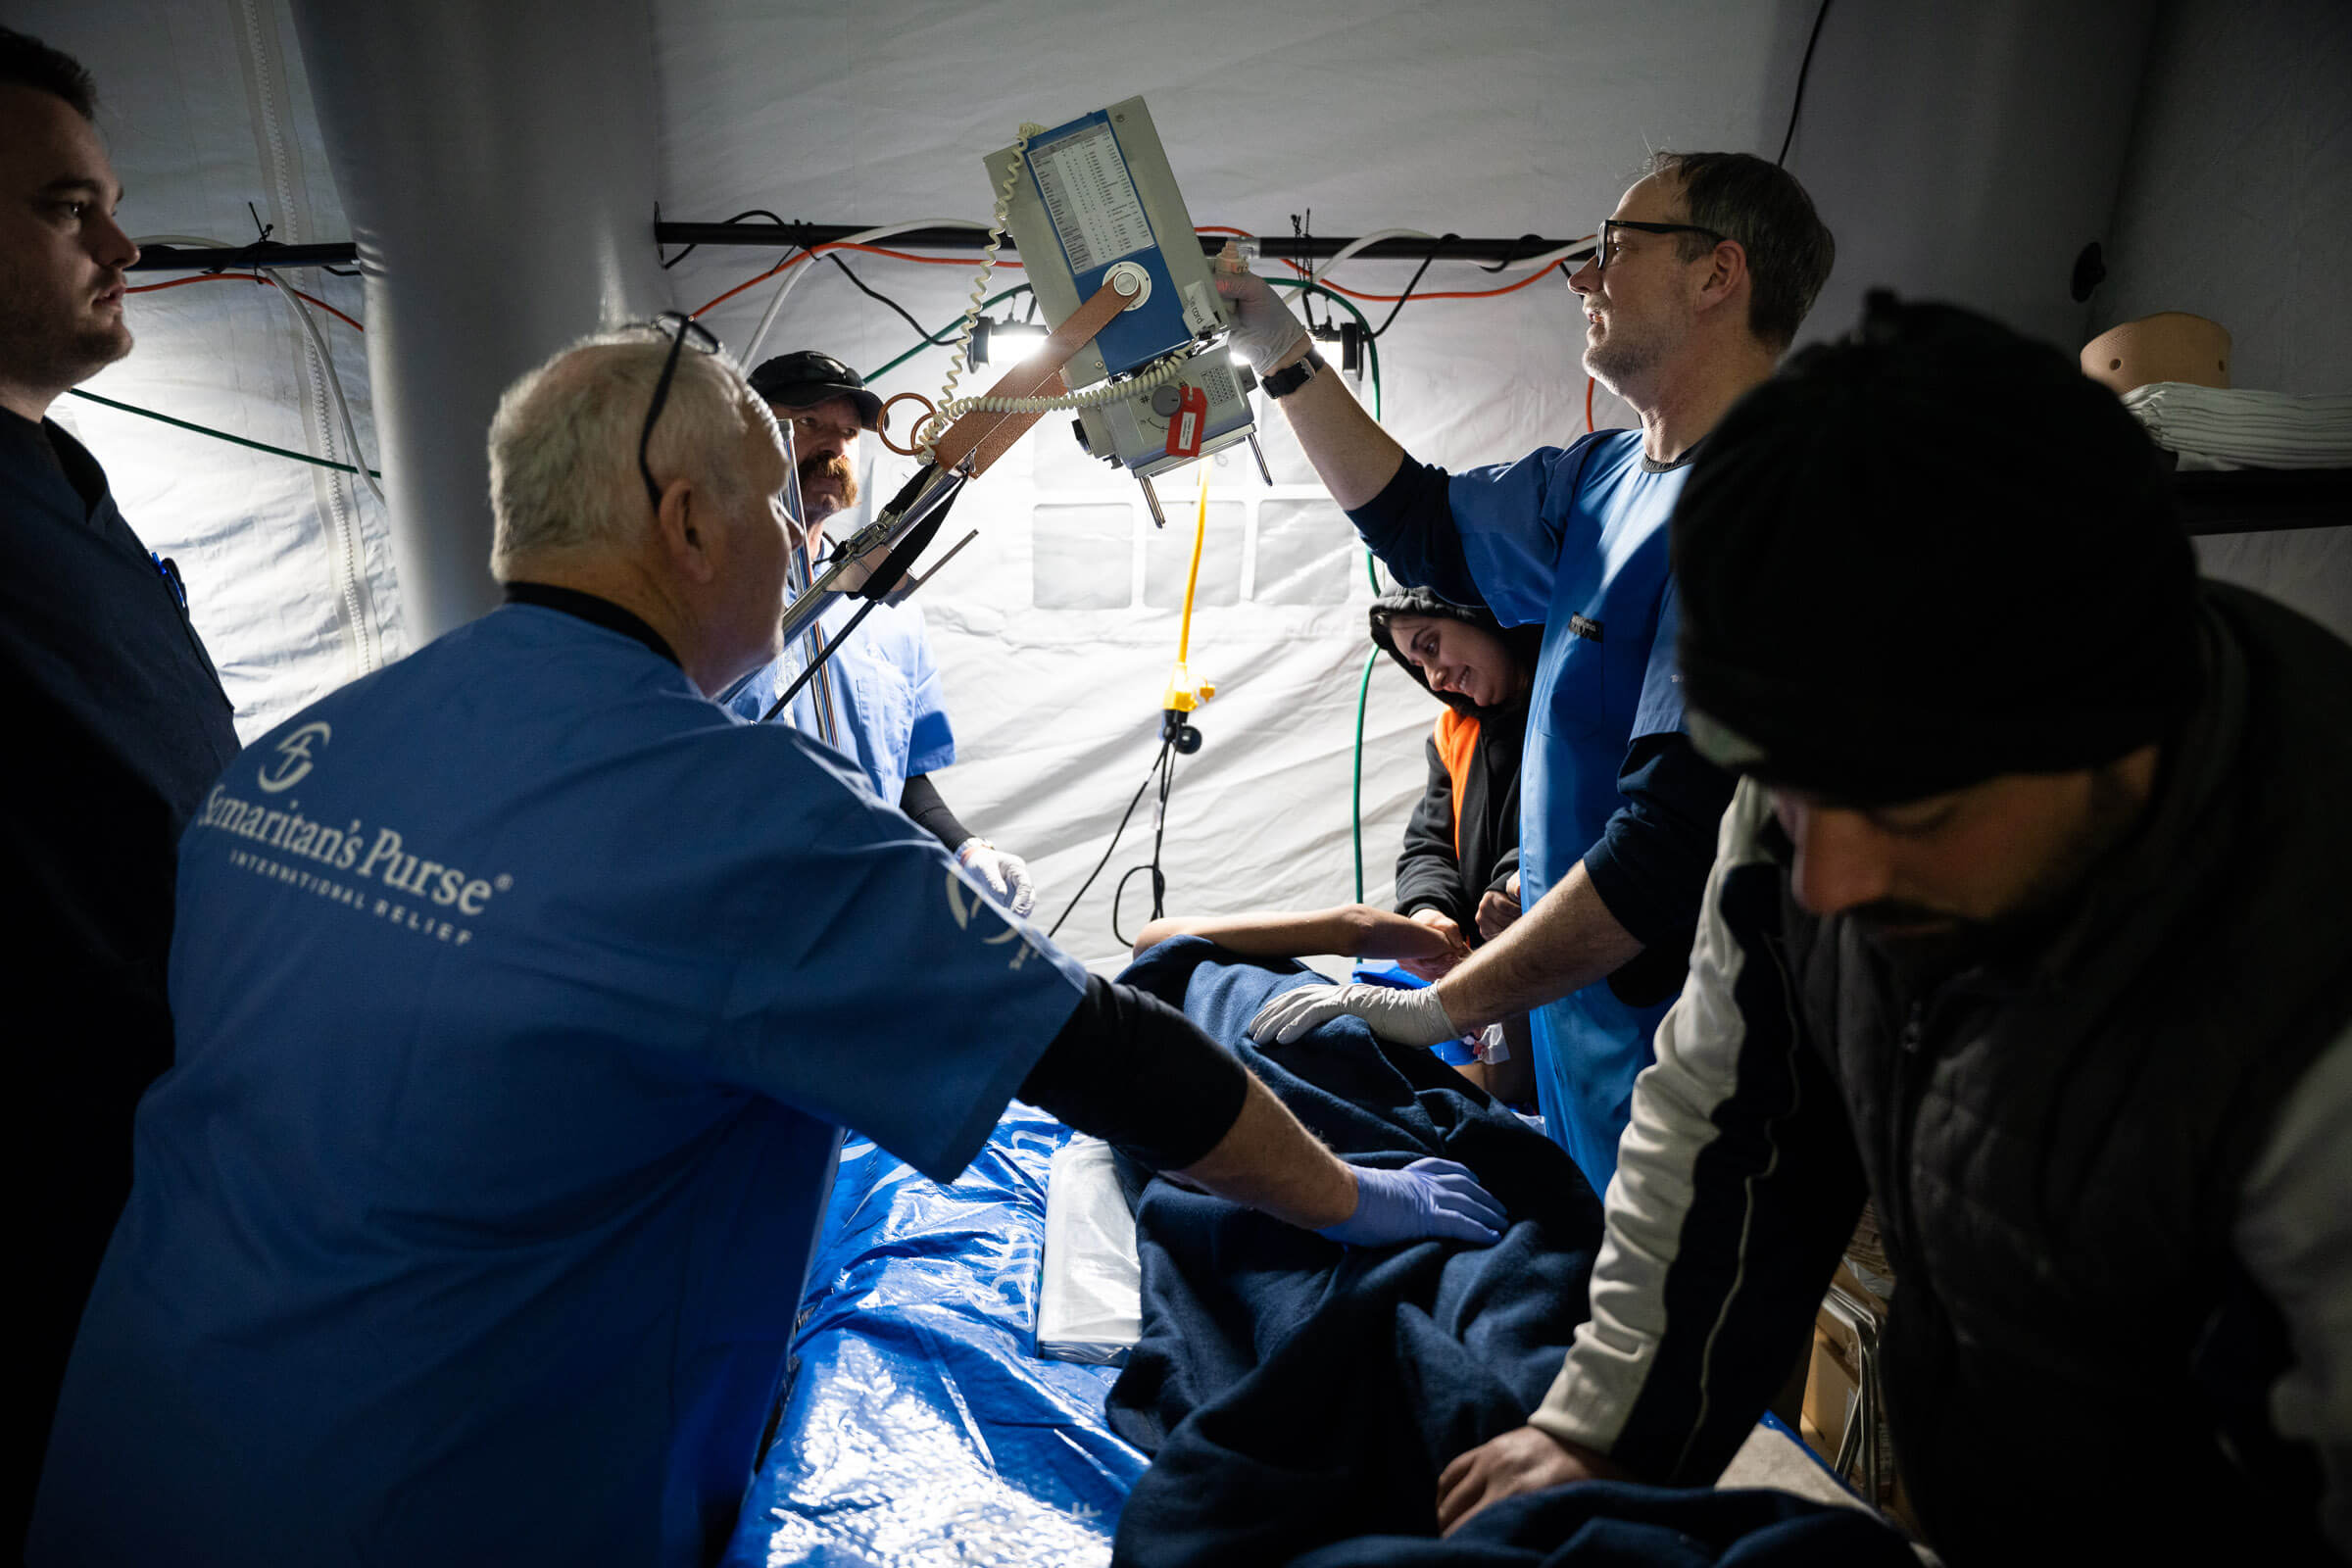 The team at our Emergency Field Hospital is working around the clock to care for survivors, including Mehmet.